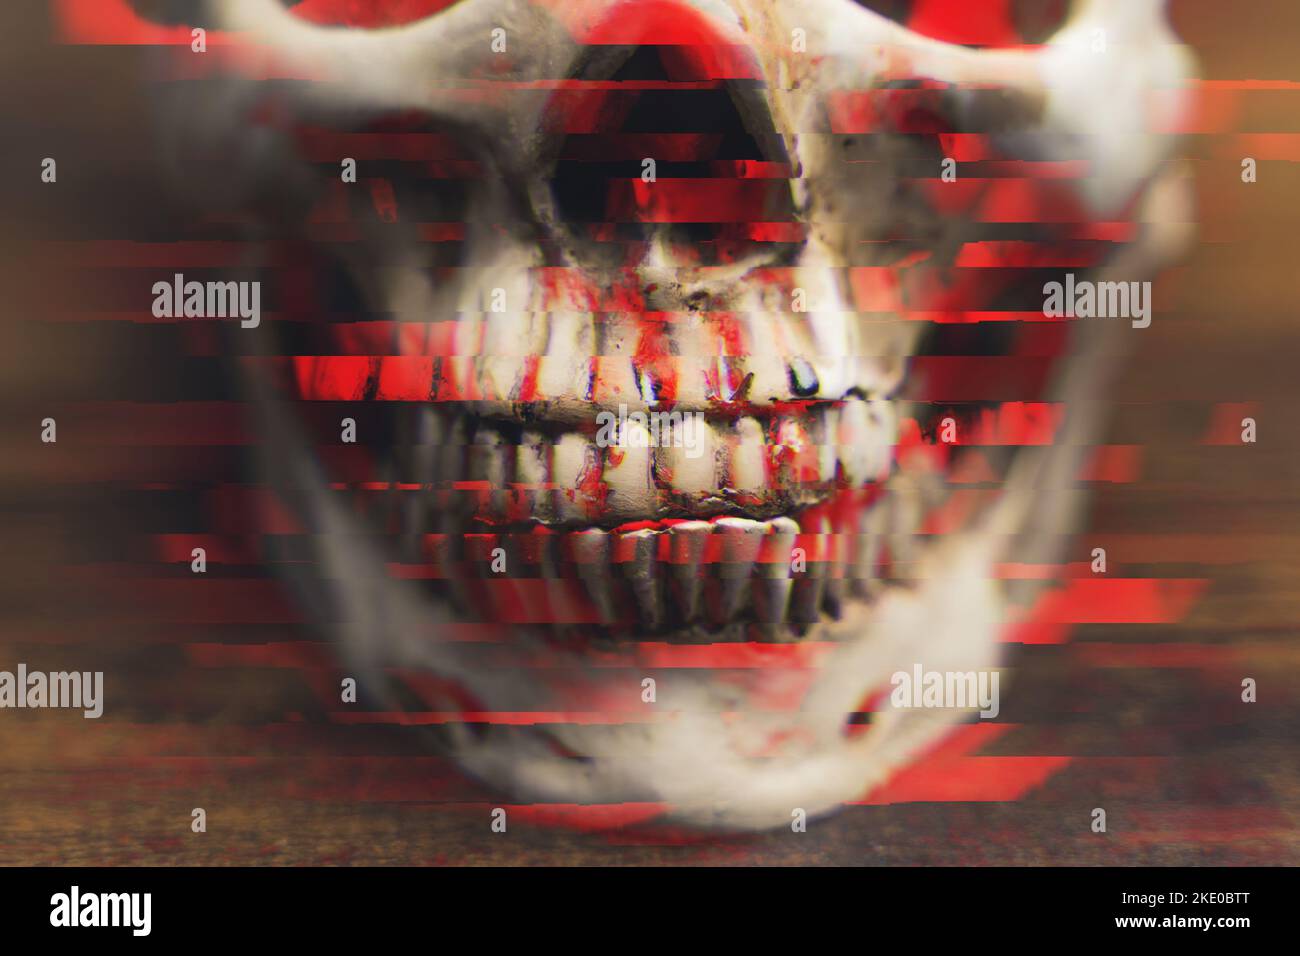 Illustration. Closeup on dirty black teeth and jaw of a human skull covered with chromatic aberration created with red color. Blurred background. High quality 3d illustration Stock Photo